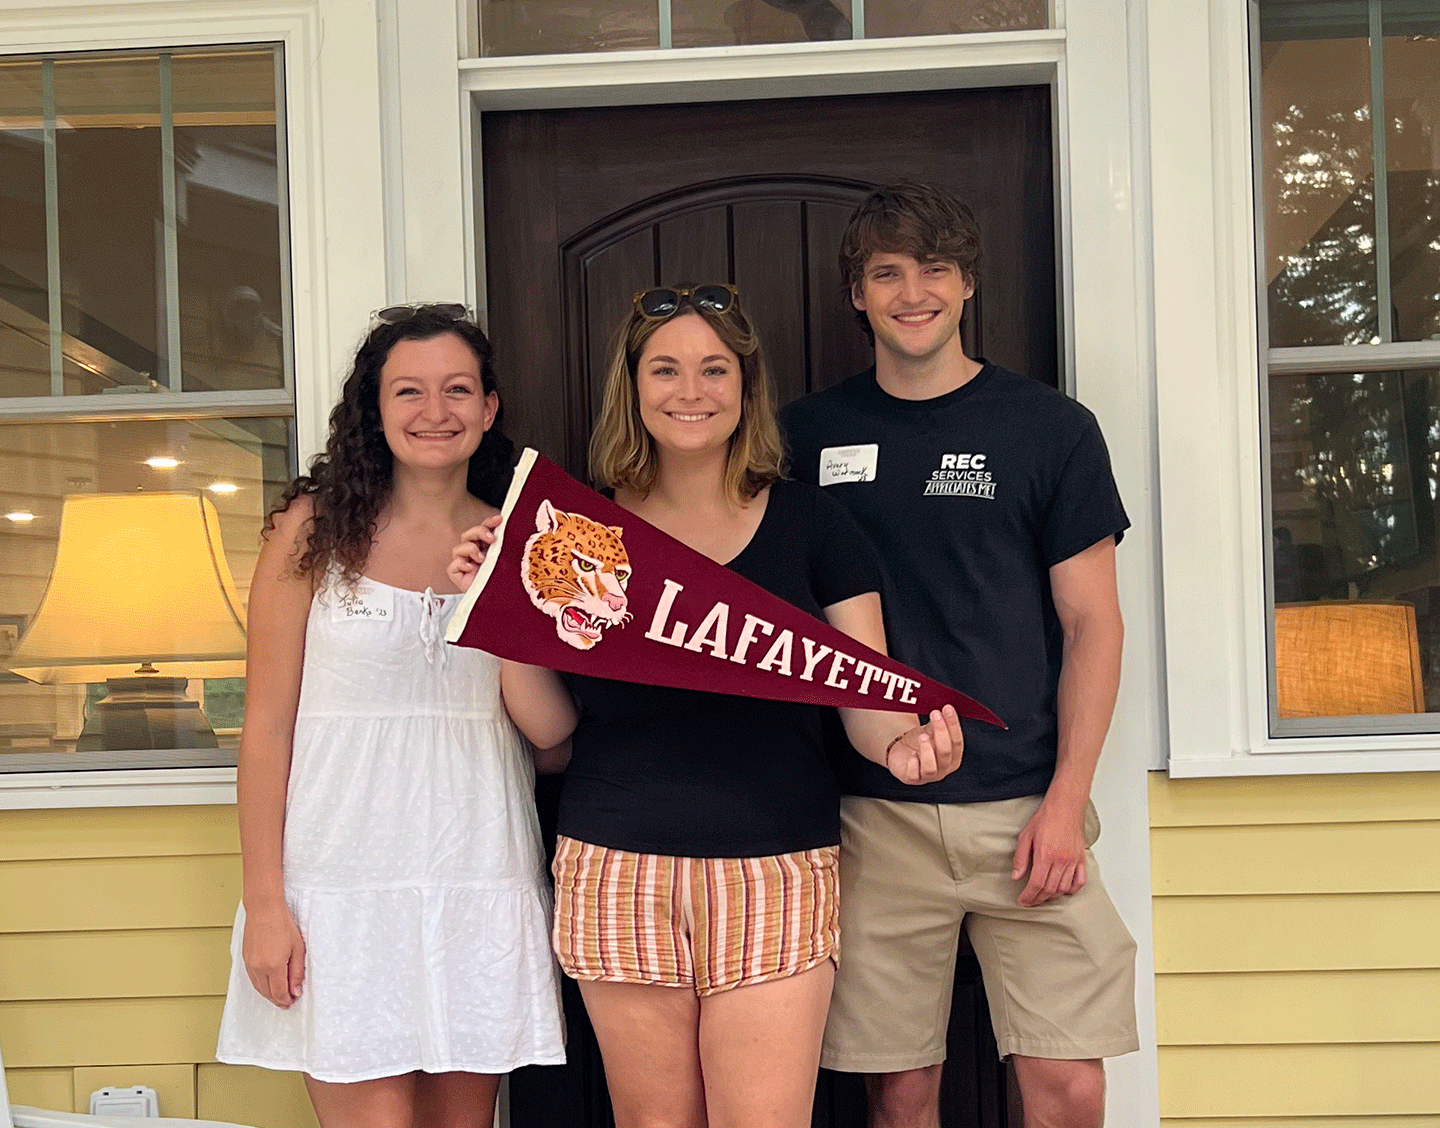 Three students smile at the camera and hold a Lafayette flag